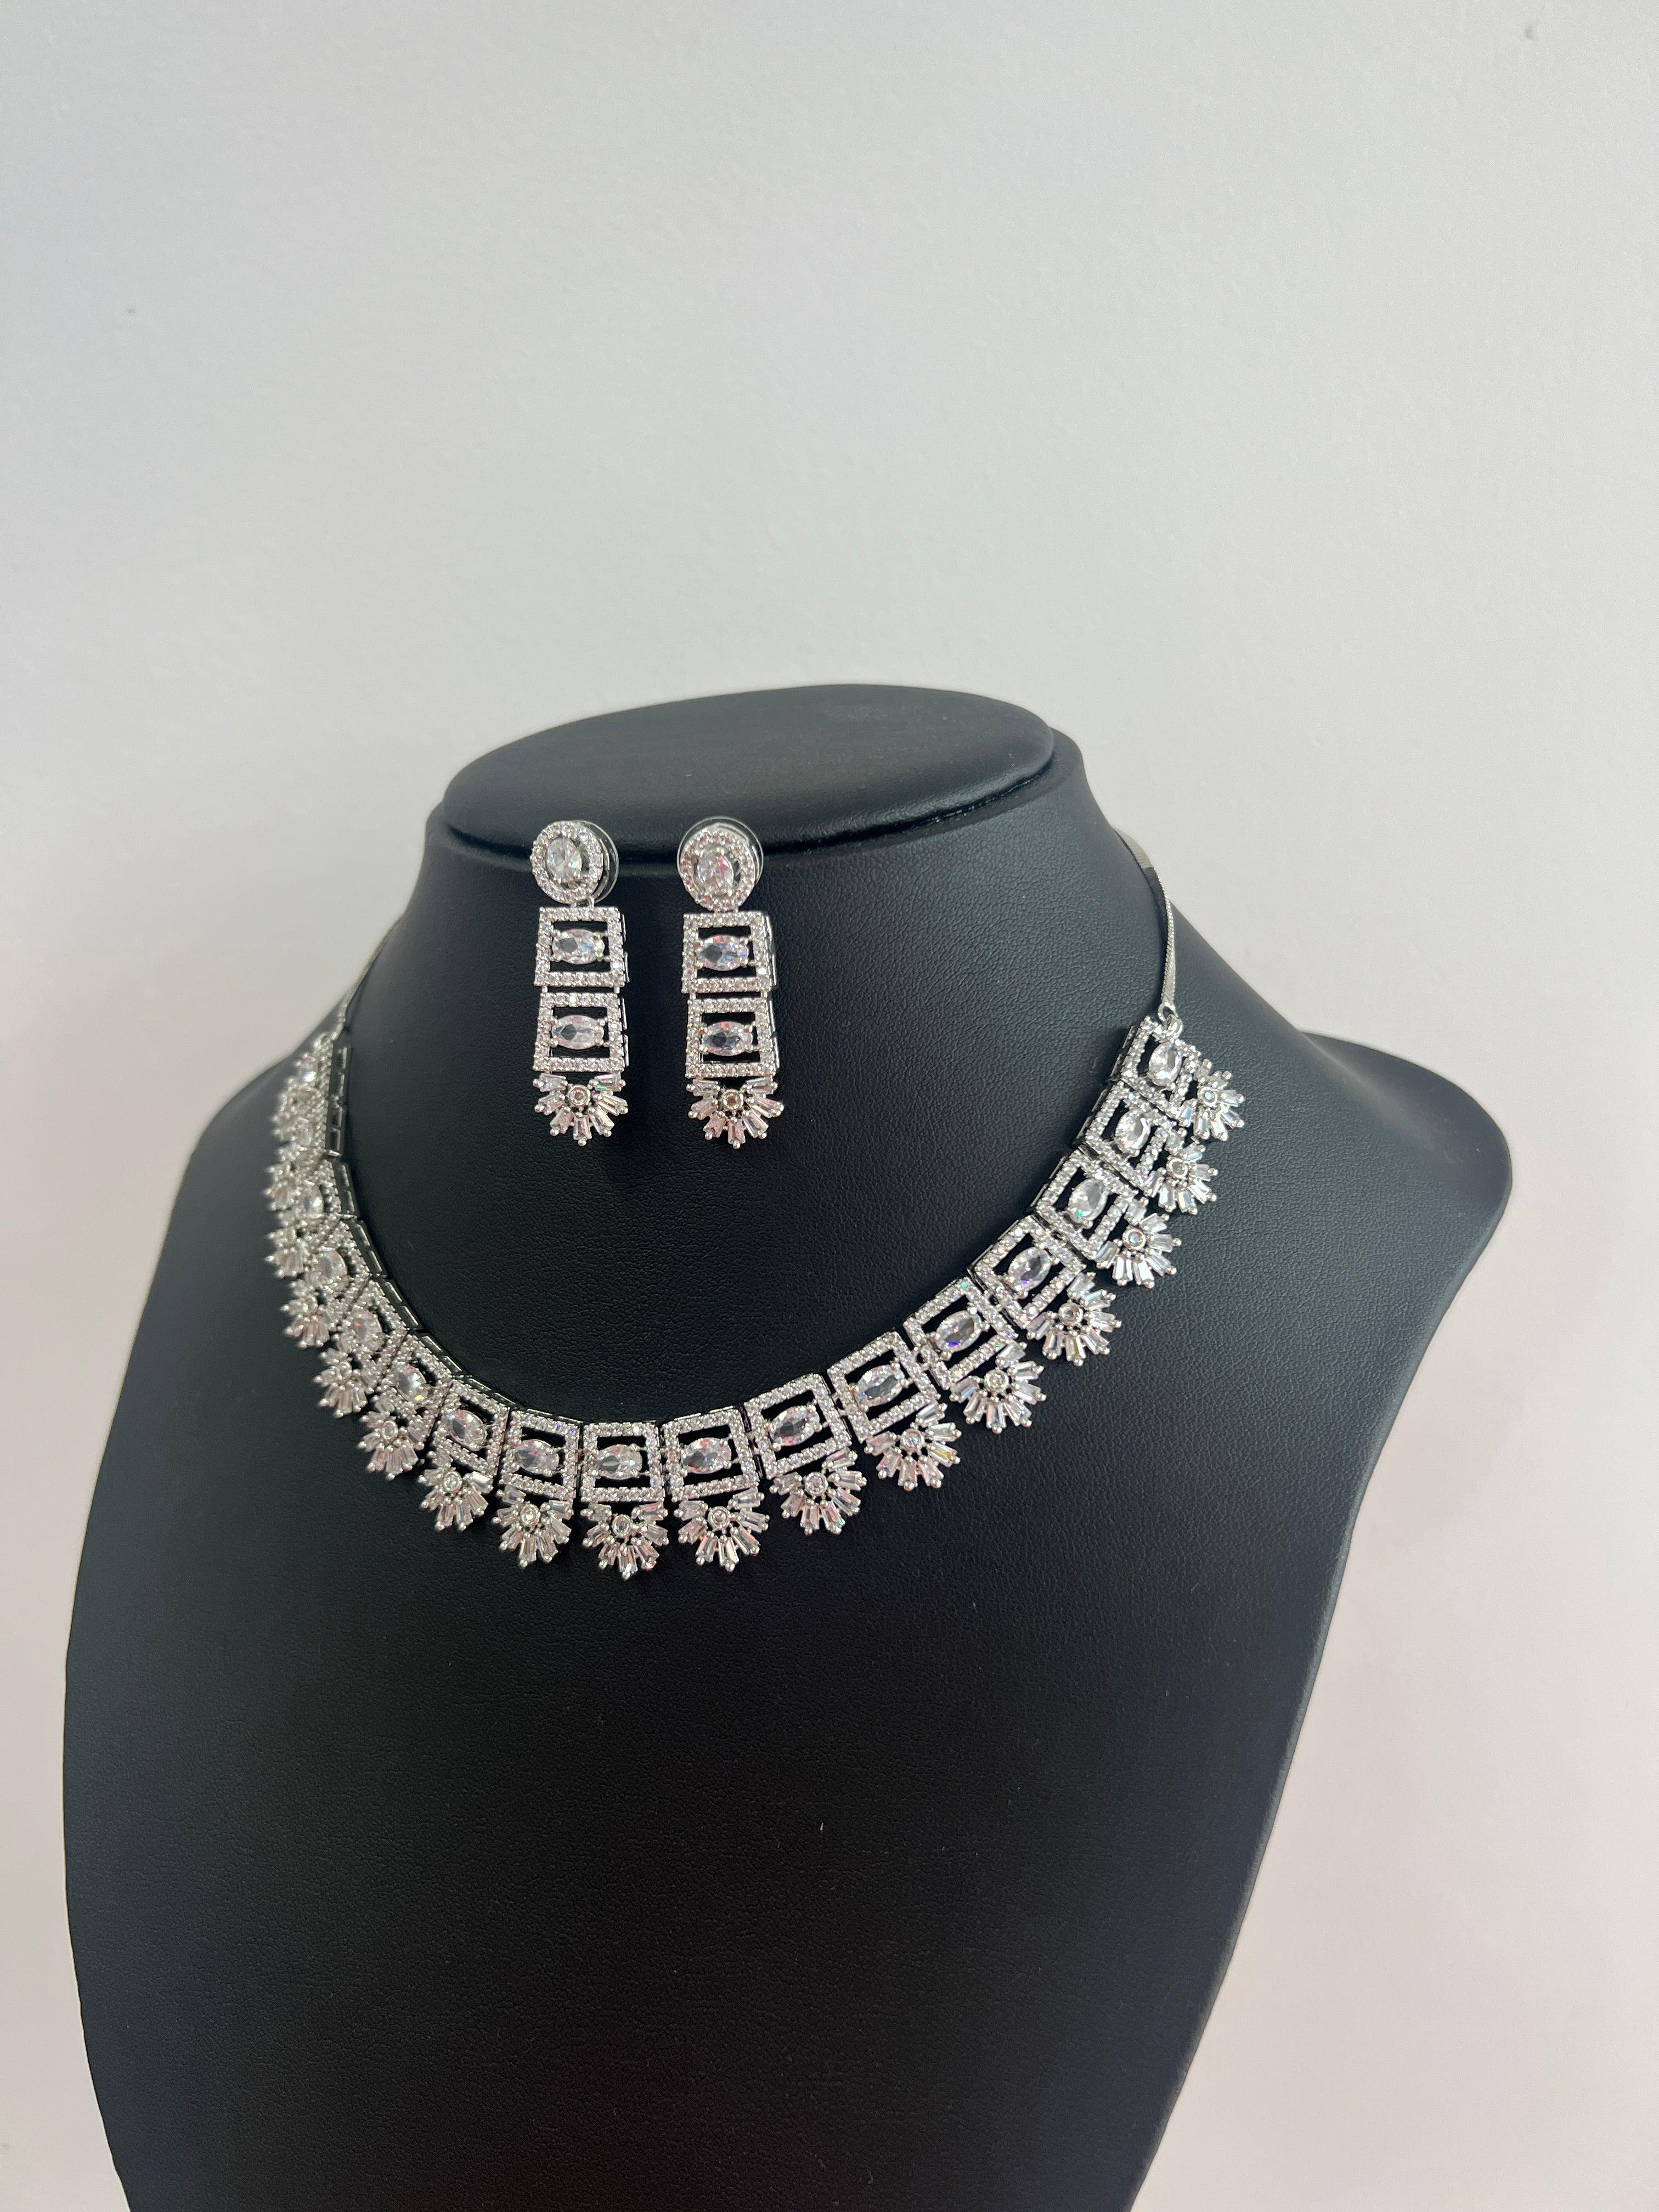 American Diamond Necklace Set with Crystal Stone - Boutique Nepal Australia 